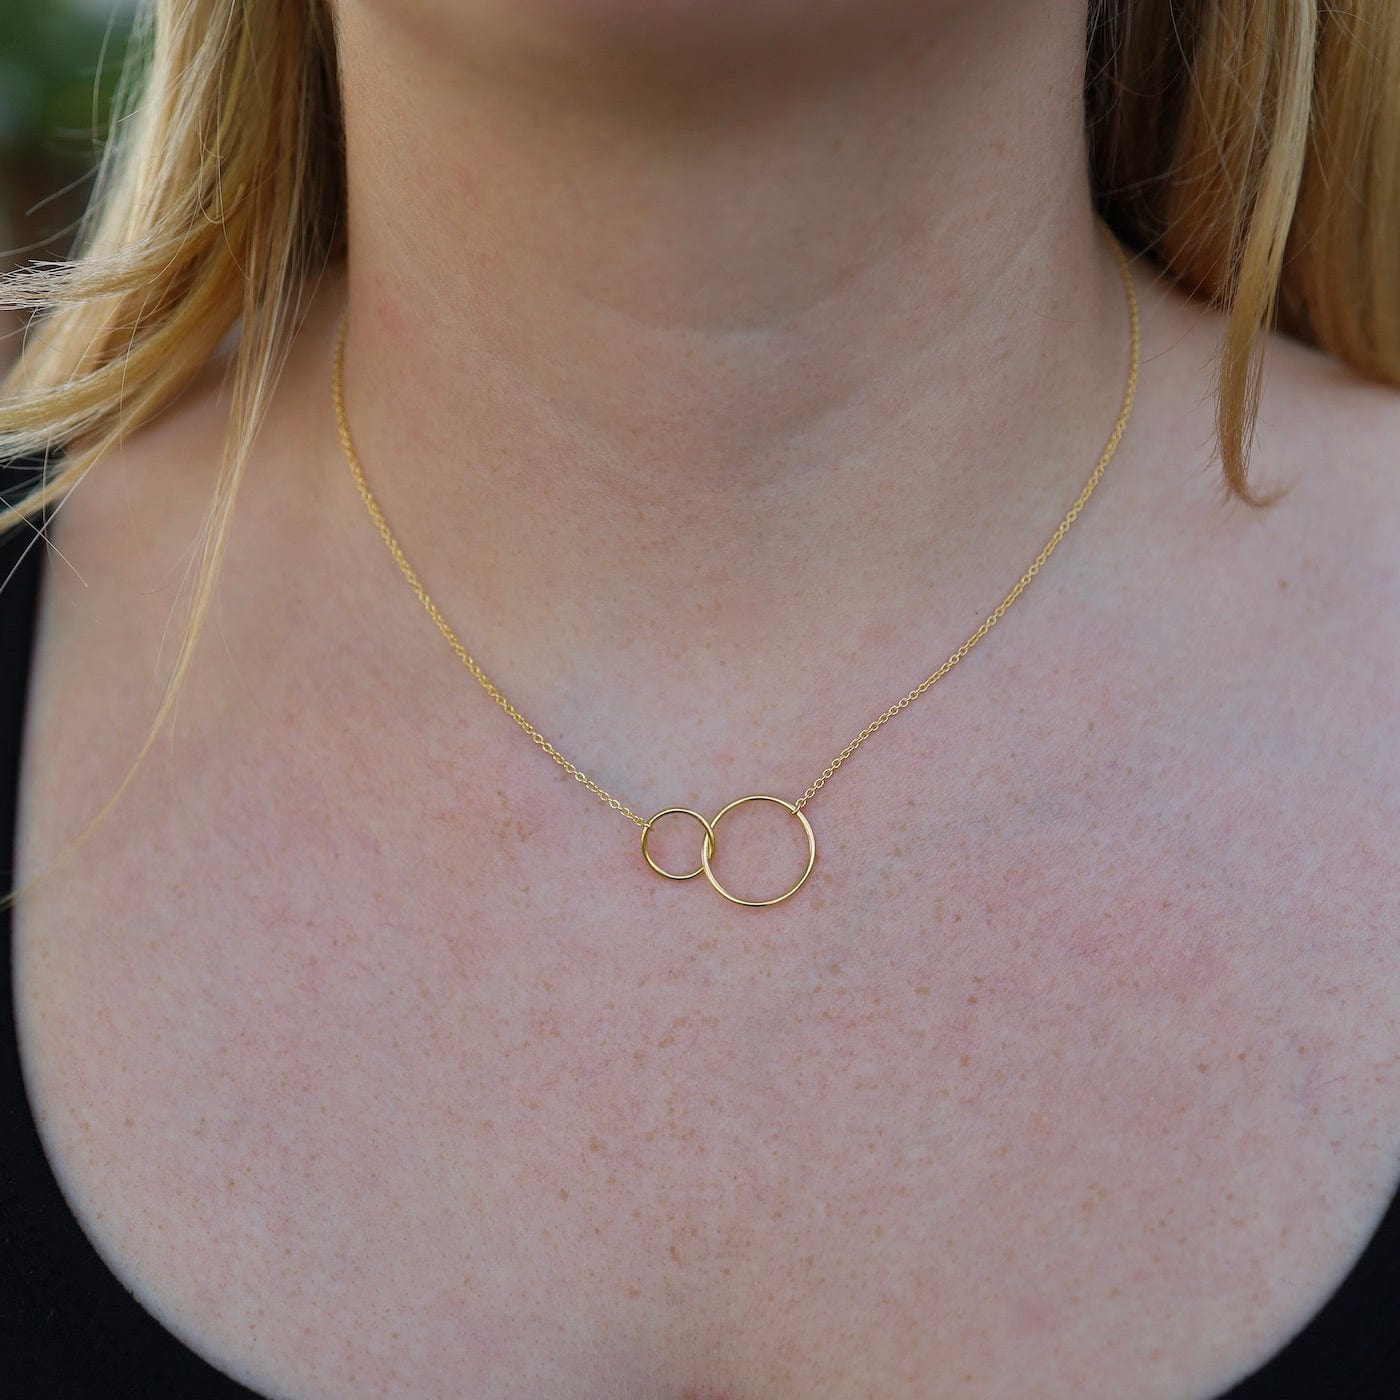 Made in Italy Glitter Enamel Interlocking Circles Necklace in 14K Gold |  Zales Outlet